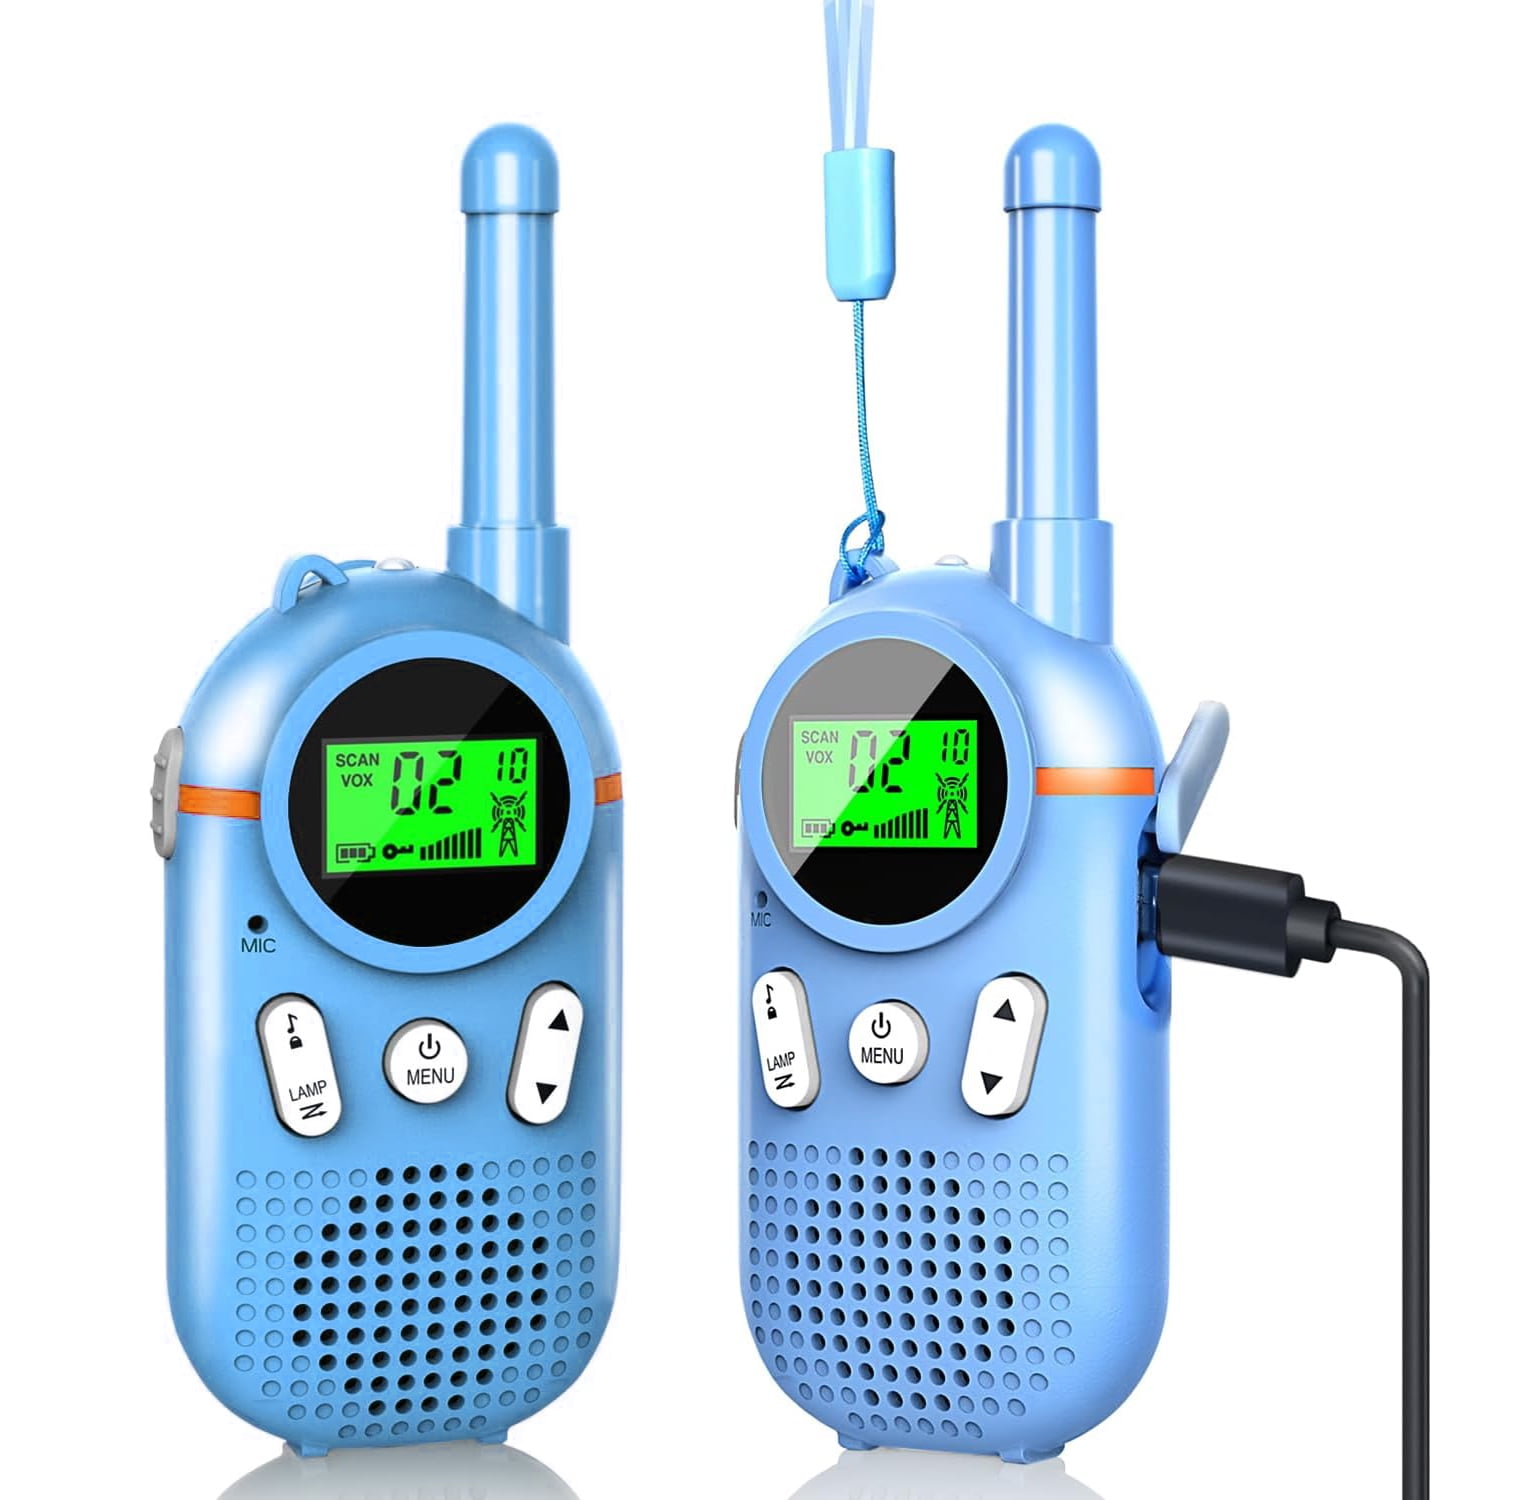 Onn. 16 Miles Walkie Talkies 2pk with Two Way Radios, LED Light,  Rechargeable, 121 Channels